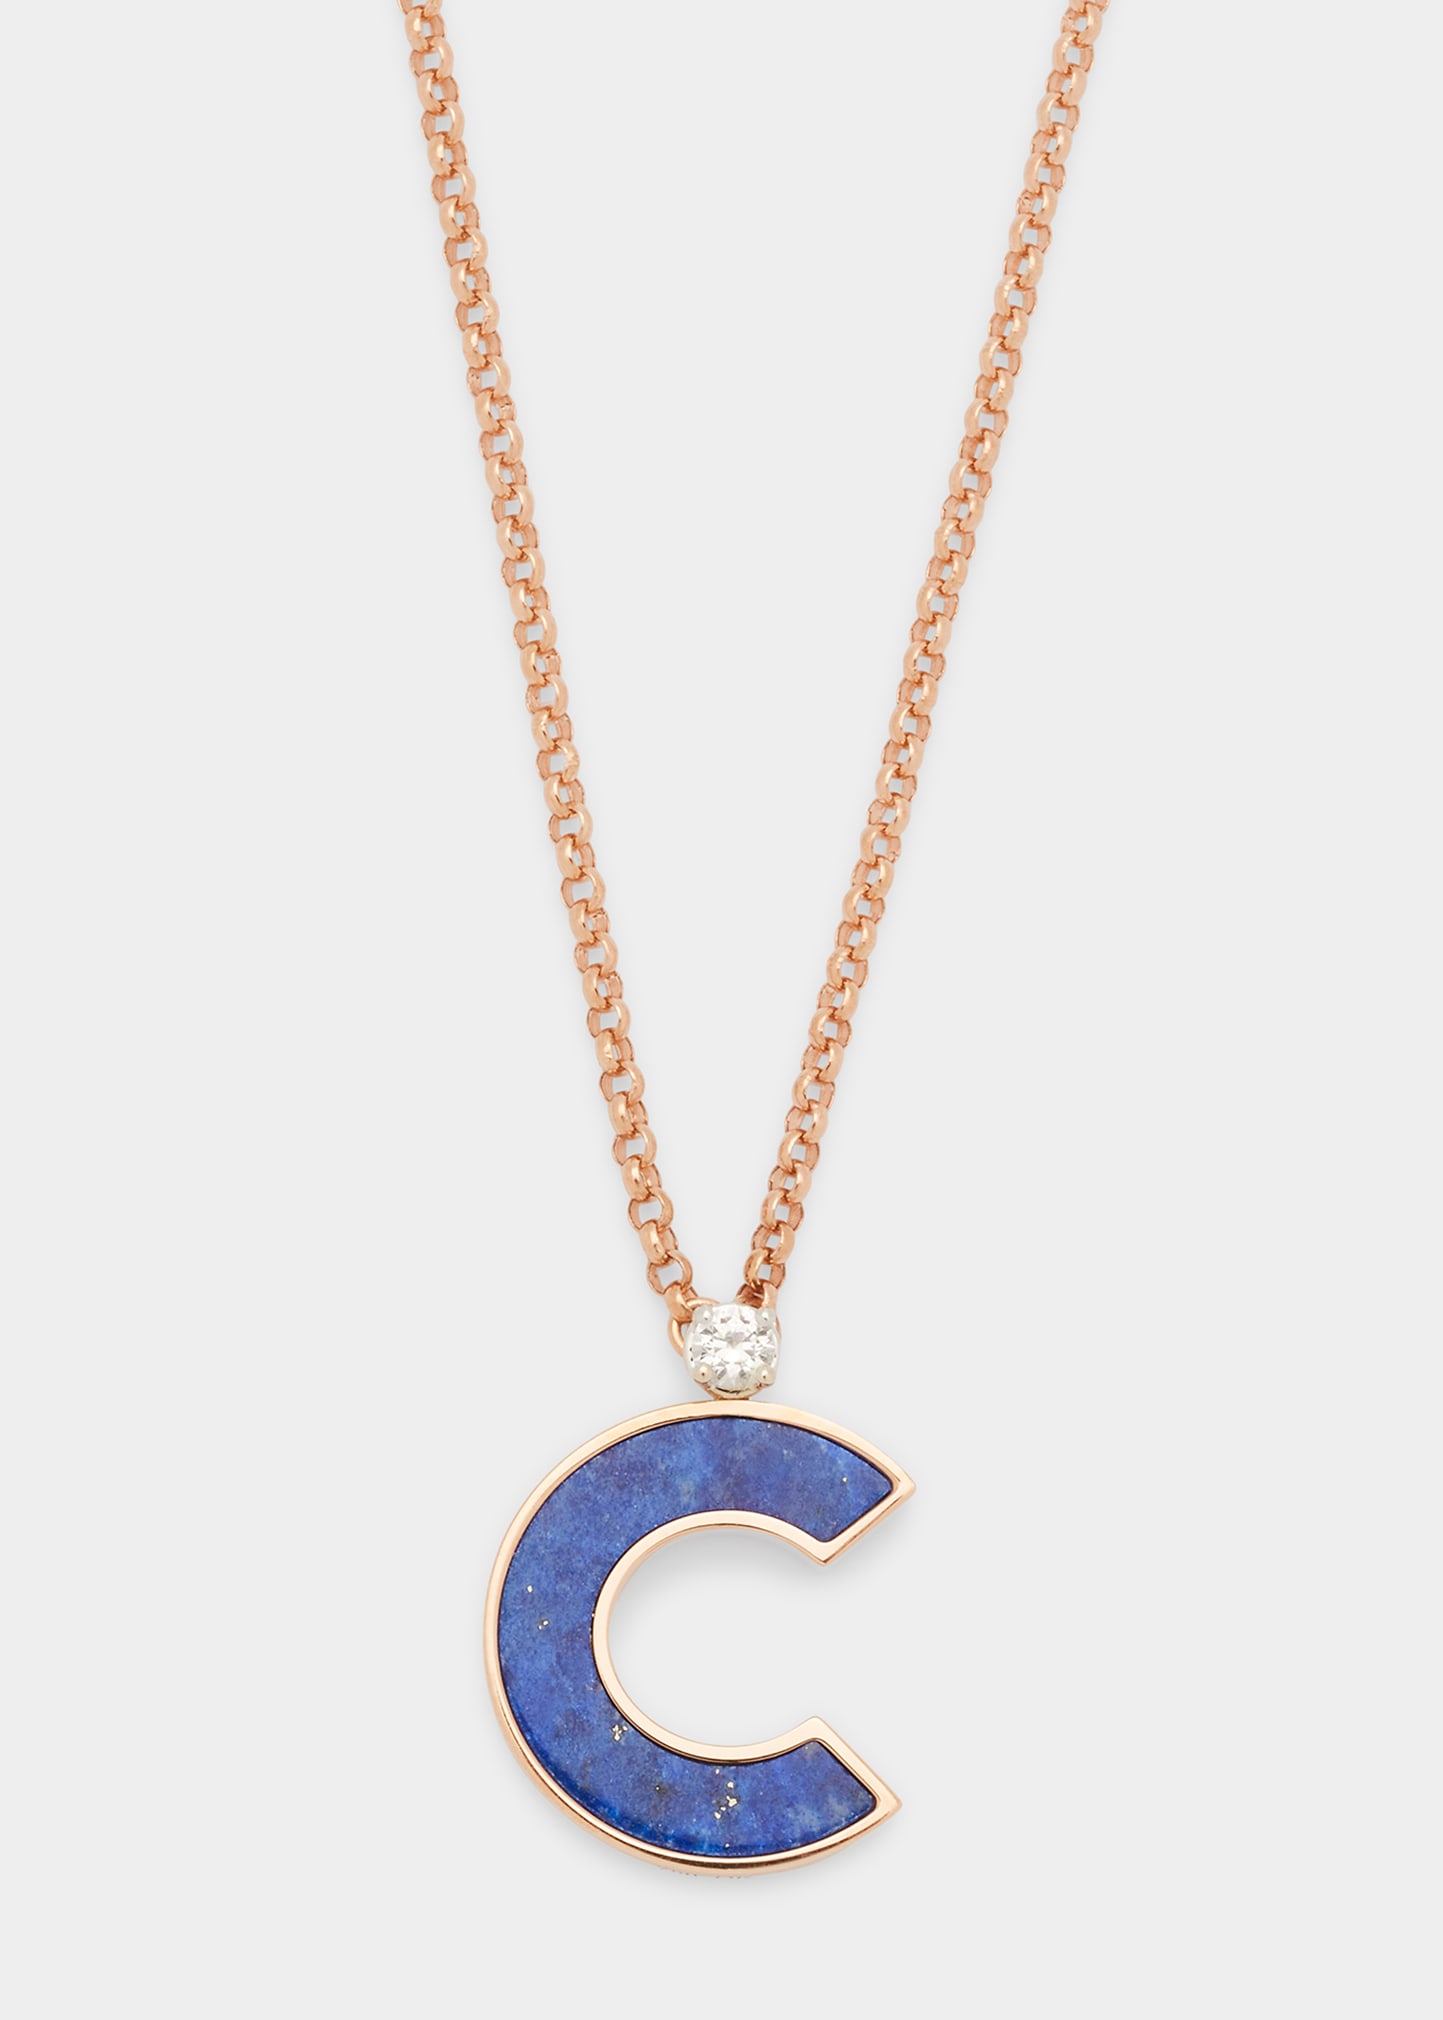 Rose Gold 'C' Letter Charm Necklace with Lapis and White Sapphire